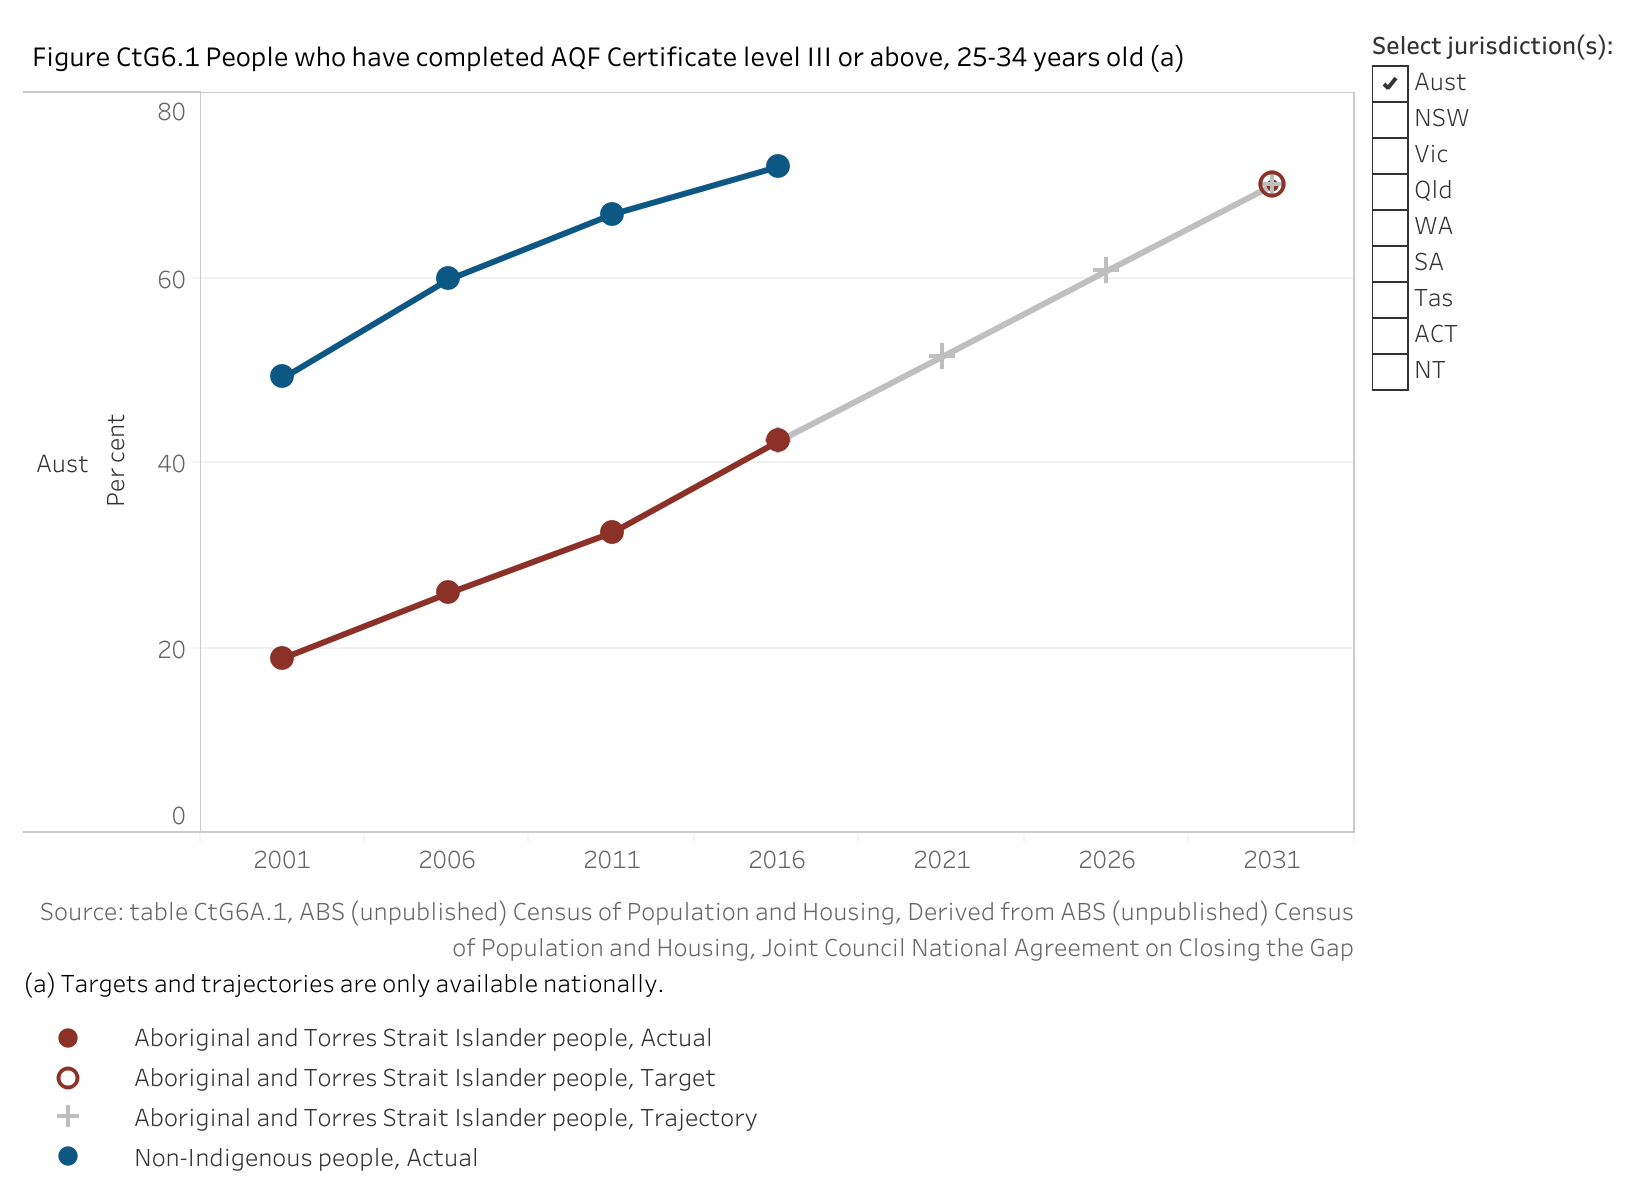 Figure CtG6.1. Line chart showing the proportion of Aboriginal and Torres Strait Islander people and non-Indigenous people (aged 25 to 34 years) who have completed non-school qualifications at Certificate level III or above. The aim under Closing the Gap is to increase the proportion for Aboriginal and Torres Strait Islander people from a 2016 baseline value of 42.3 per cent to a target value of 70 per cent by 2031.